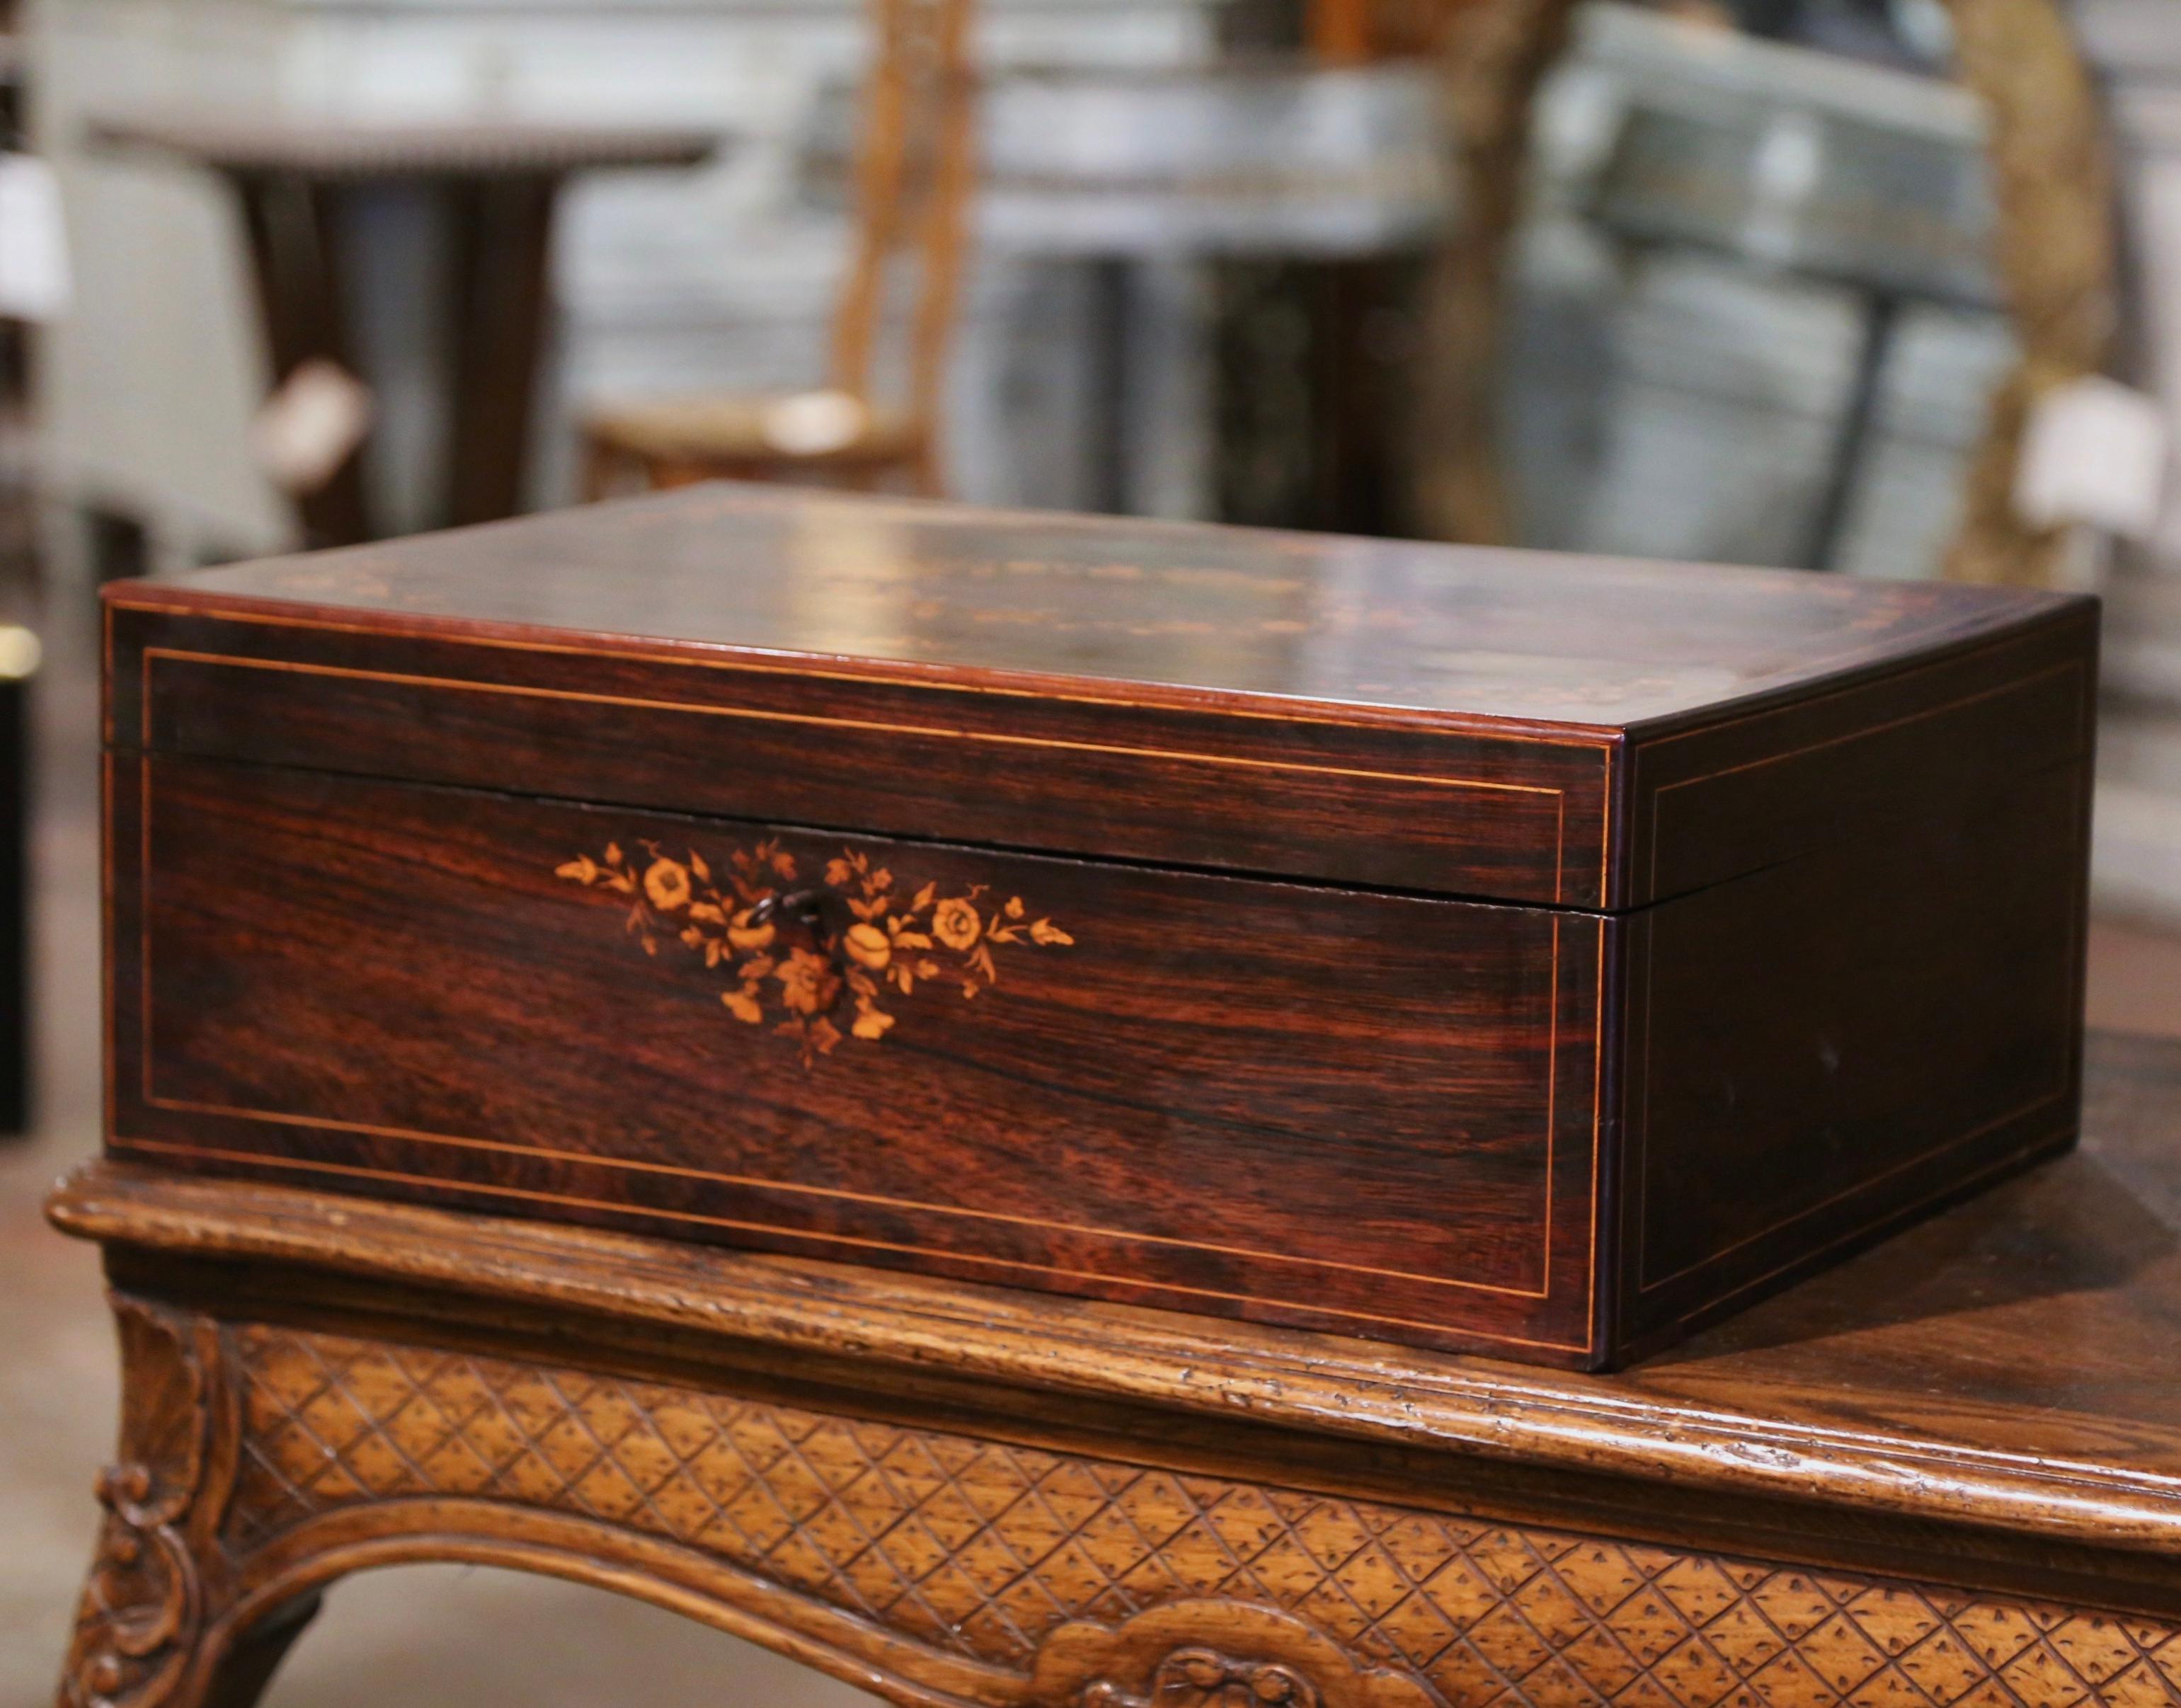 Decorate a coffee table or a shelf with this elegant antique box. Created in France circa 1880, the rectangular cabinet is decorated with elegant floral inlaid work in each corner and embellished with a central foliage medallion. Opening the box, it